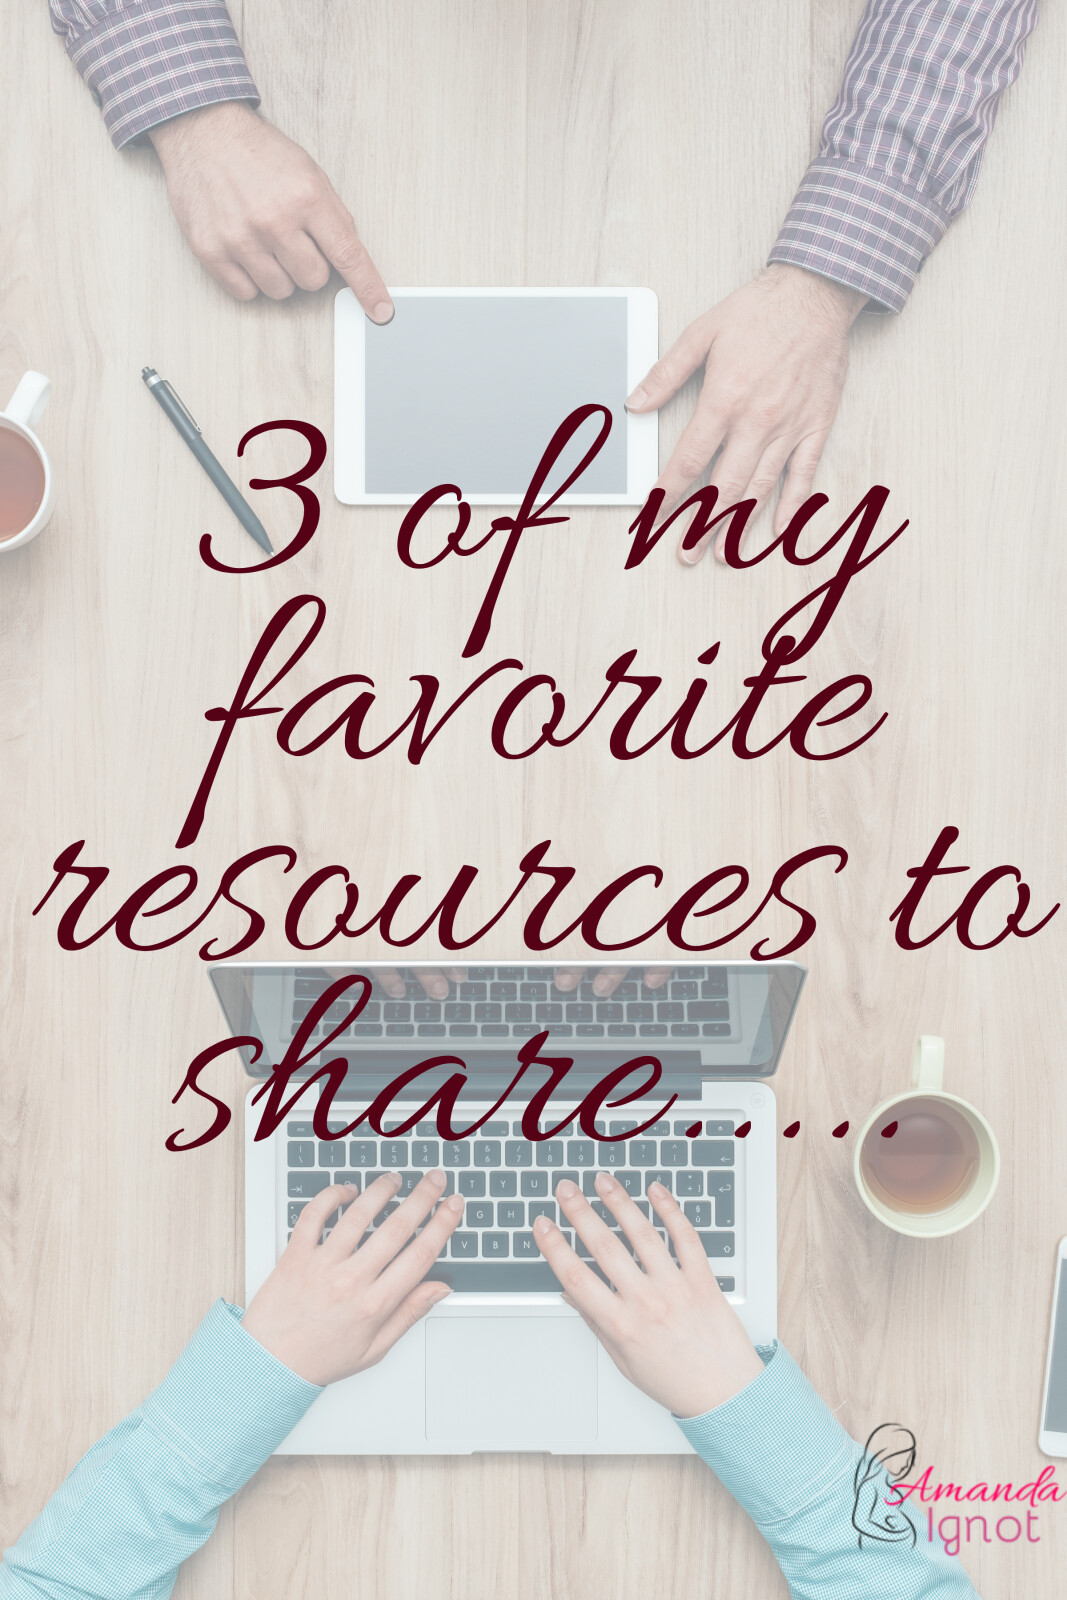 3 of my favorite resources to share….